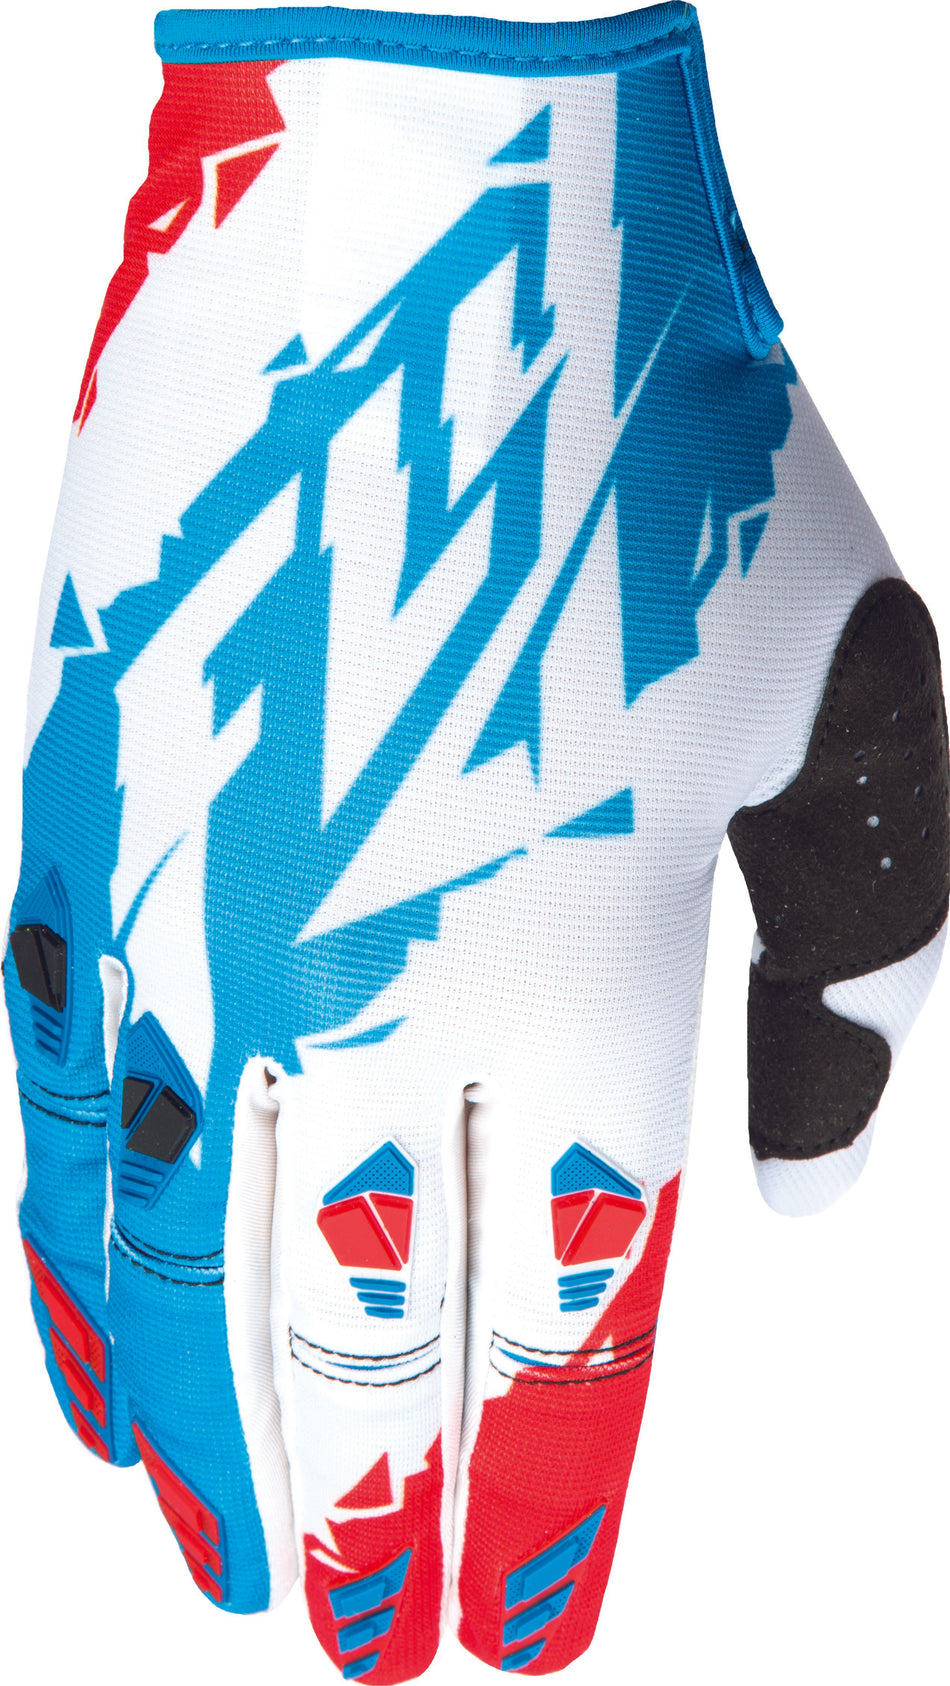 FLY RACING Kinetic Glove Red/White/Blue Sz 12 2x 370-41112